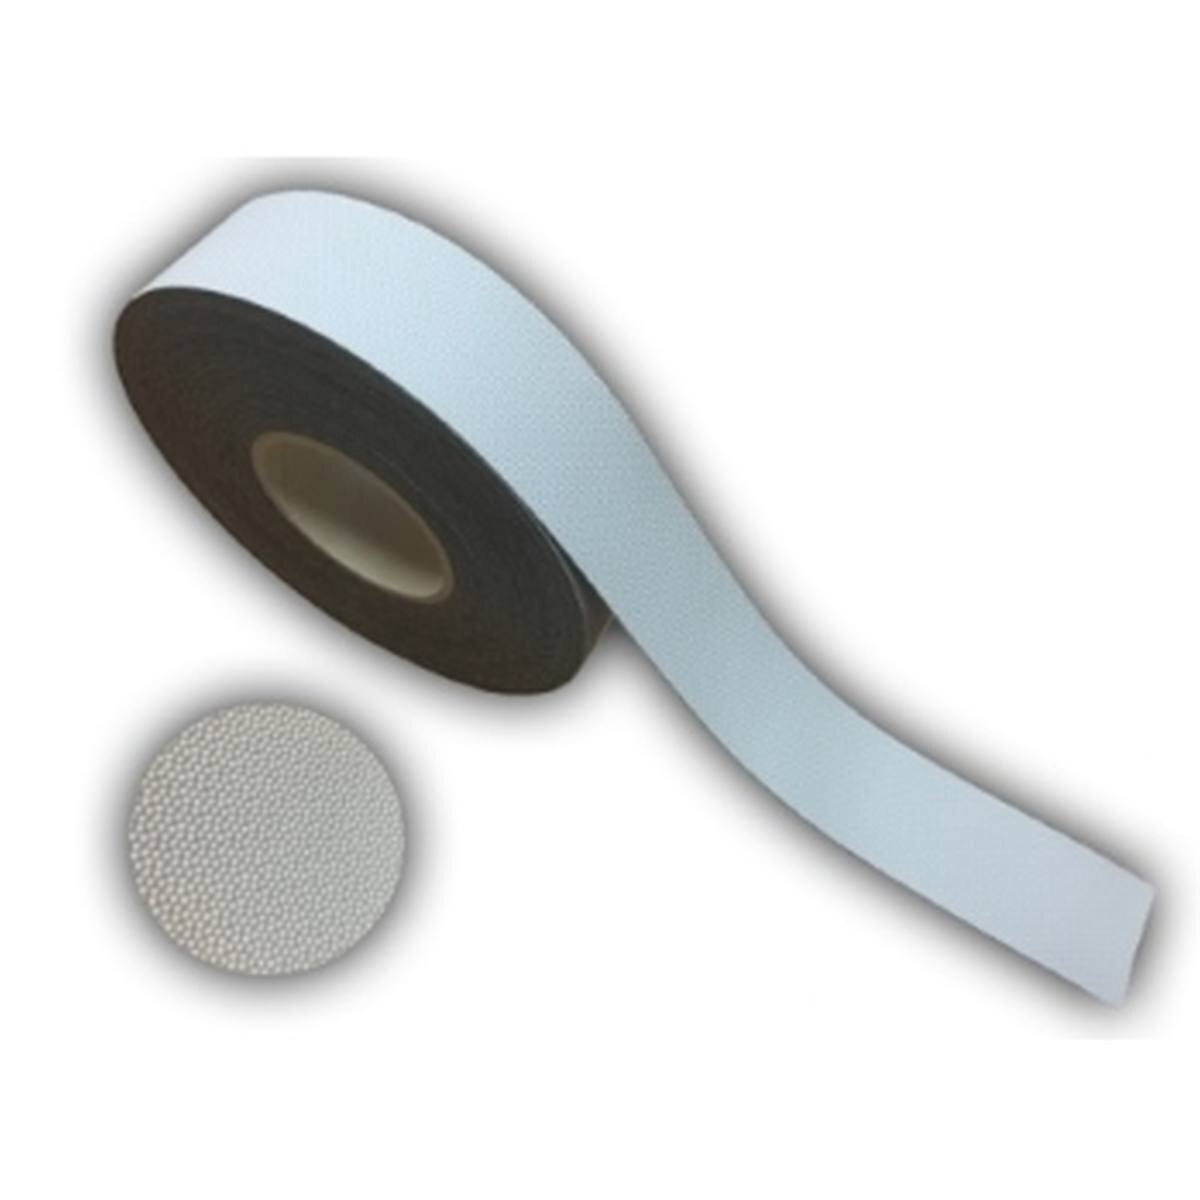 S-K-S dimpled tape 620, 25 mm x 25 m, gray, 0.8 mm